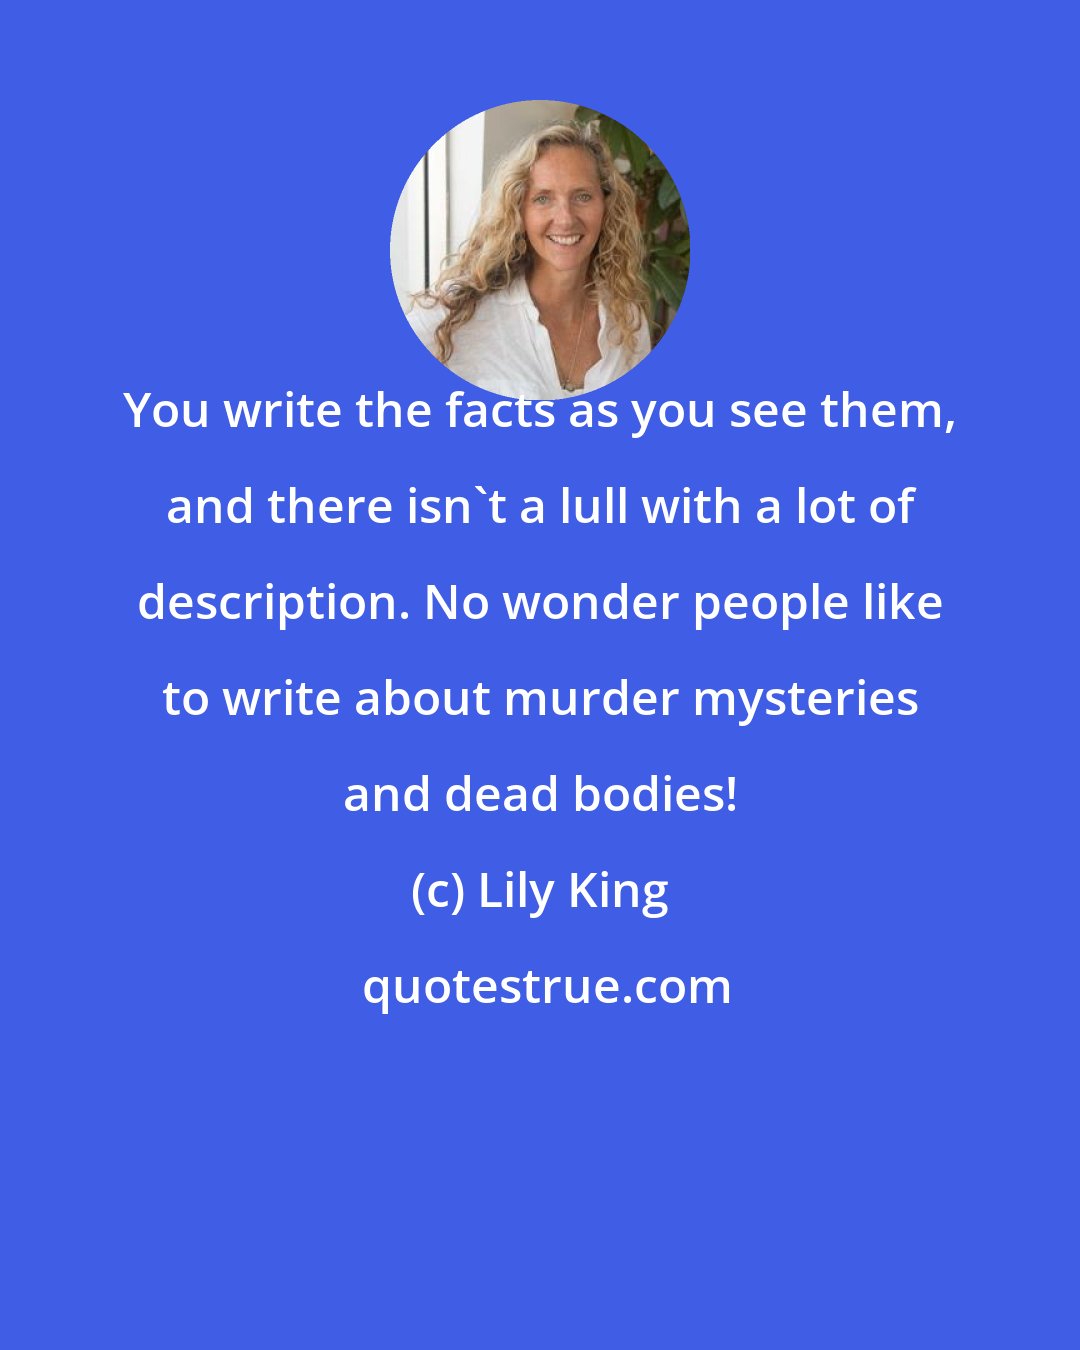 Lily King: You write the facts as you see them, and there isn't a lull with a lot of description. No wonder people like to write about murder mysteries and dead bodies!